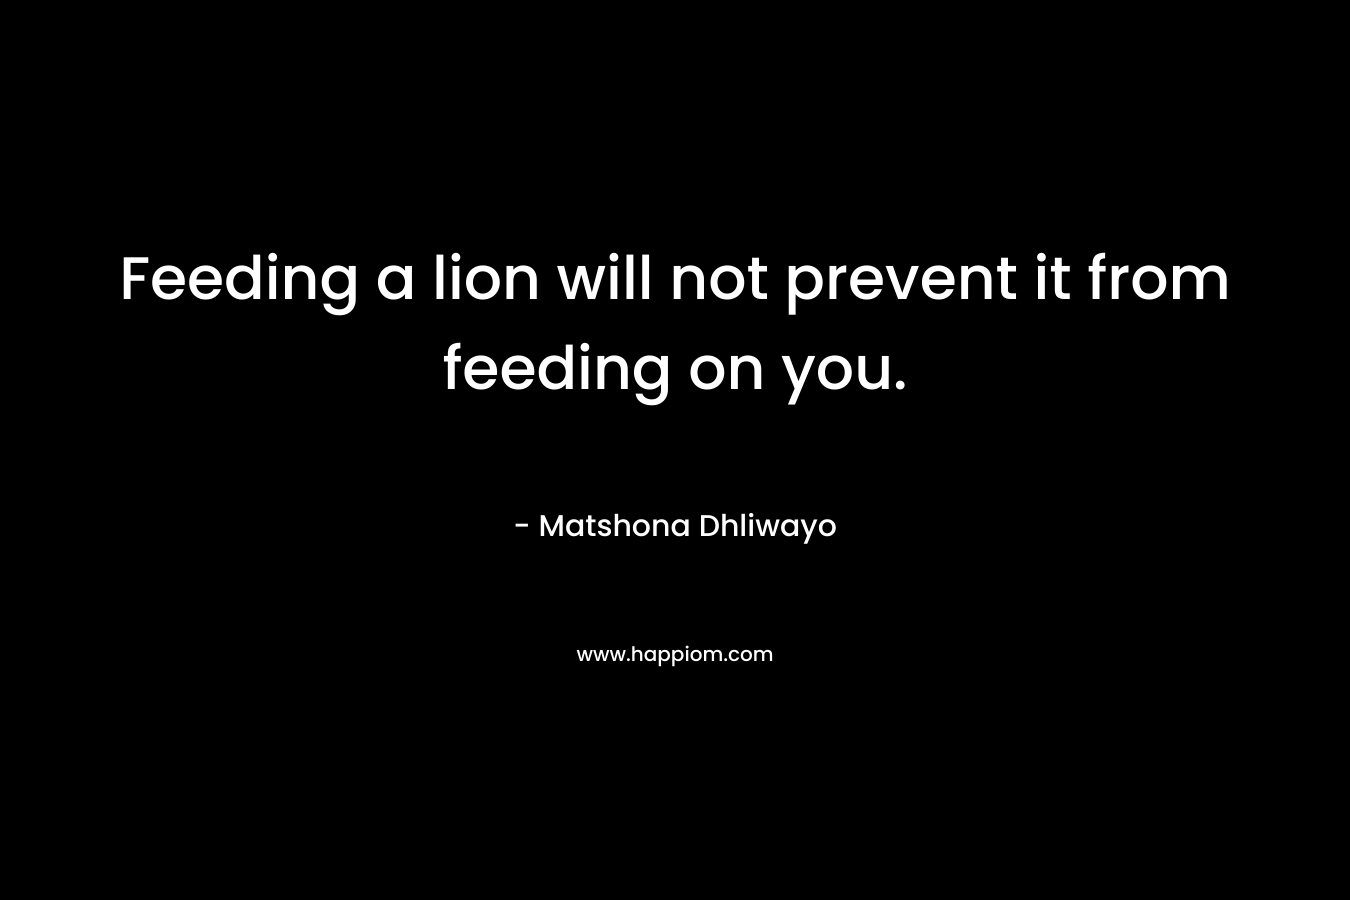 Feeding a lion will not prevent it from feeding on you.